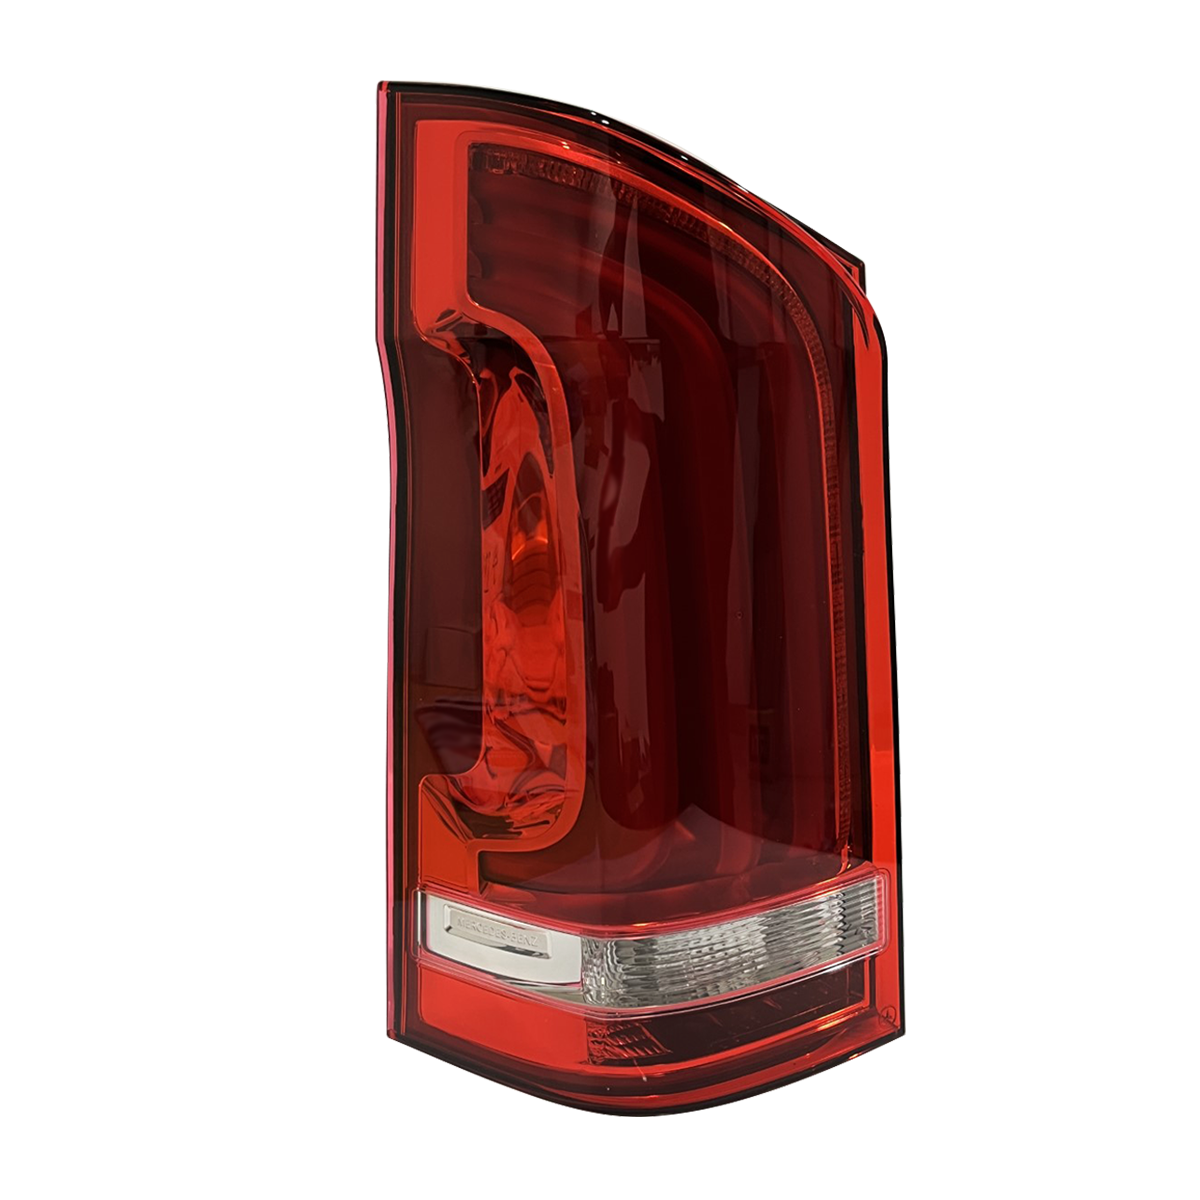 ALL SMOKED LED TAIL LIGHTS FOR MERCEDES VITO W638 1996 - 2003 MODEL